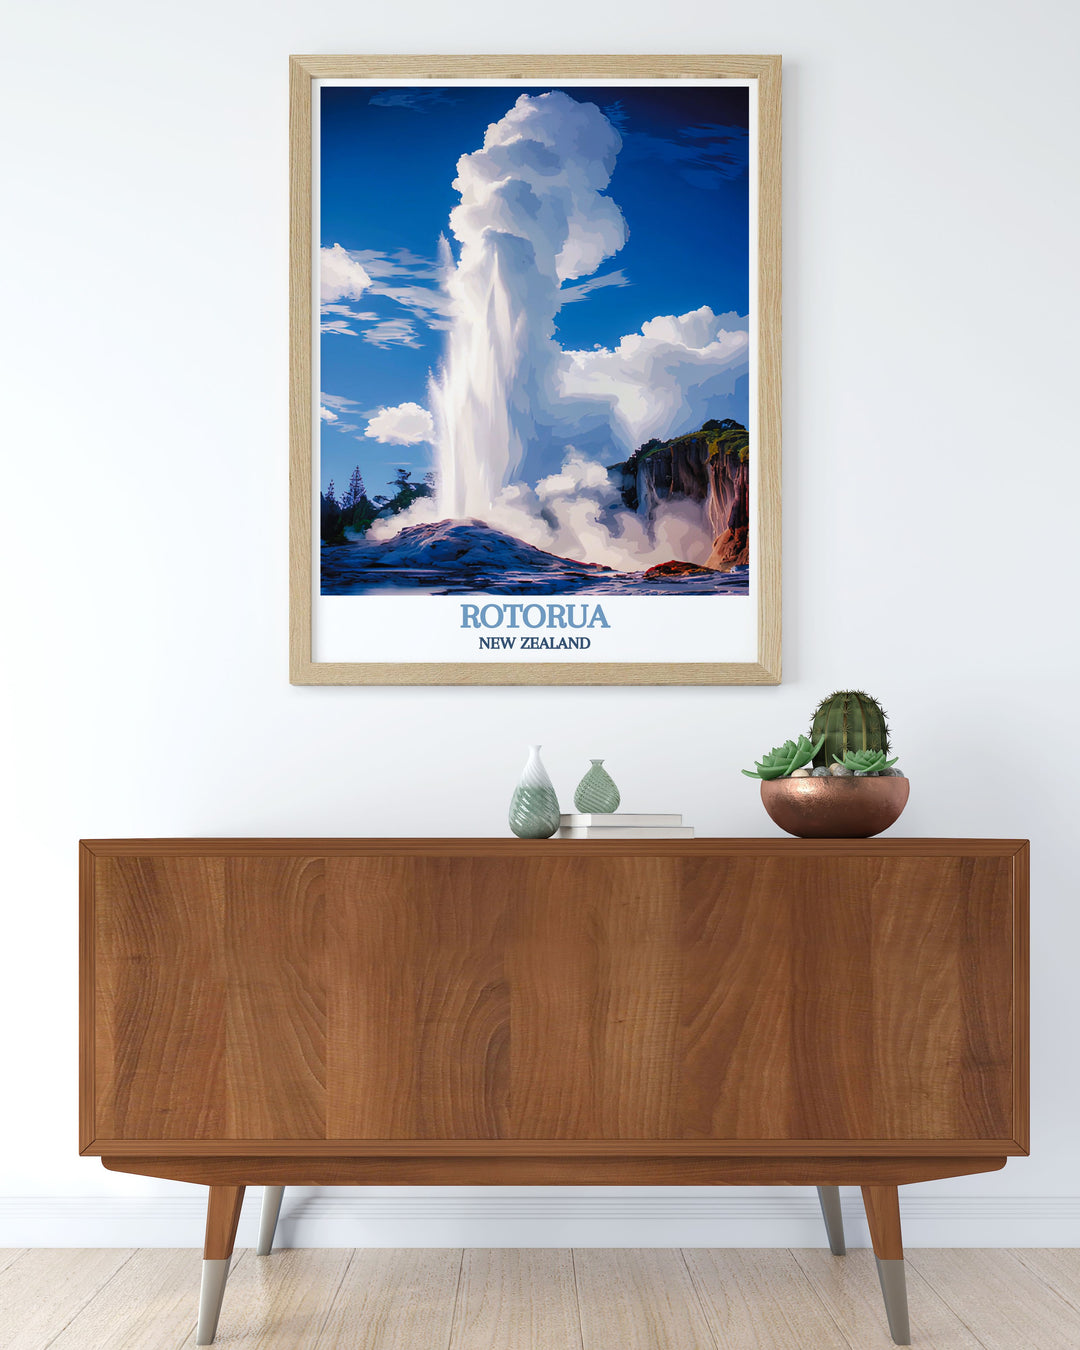 Te Puia vintage print showcasing the timeless beauty of Rotorua New Zealand. A perfect addition to any art collection and an excellent gift for nature and culture enthusiasts. This print brings a vintage charm to your home decor.